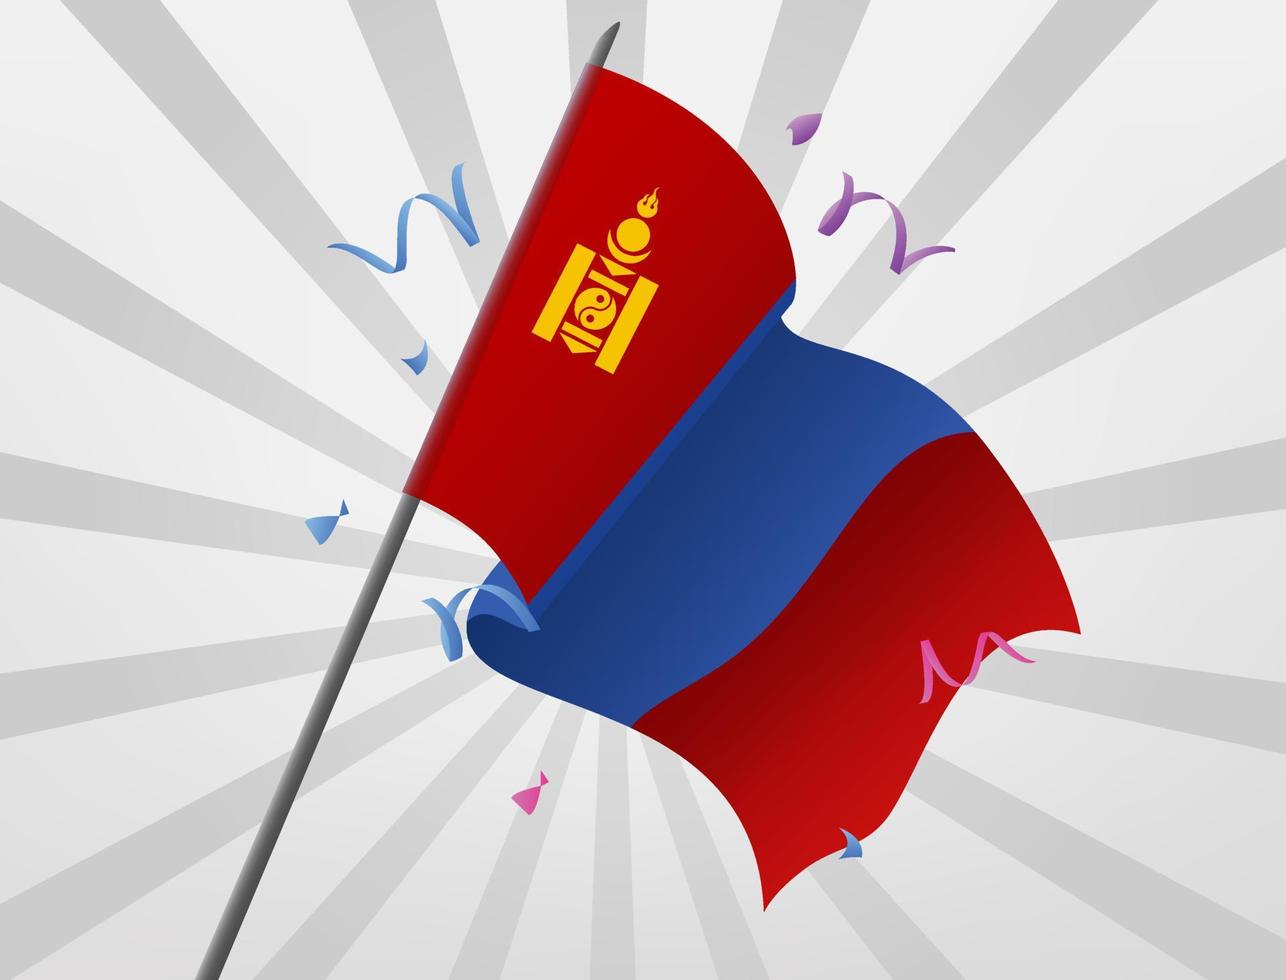 Mongolian celebratory flags rise at high altitudes vector